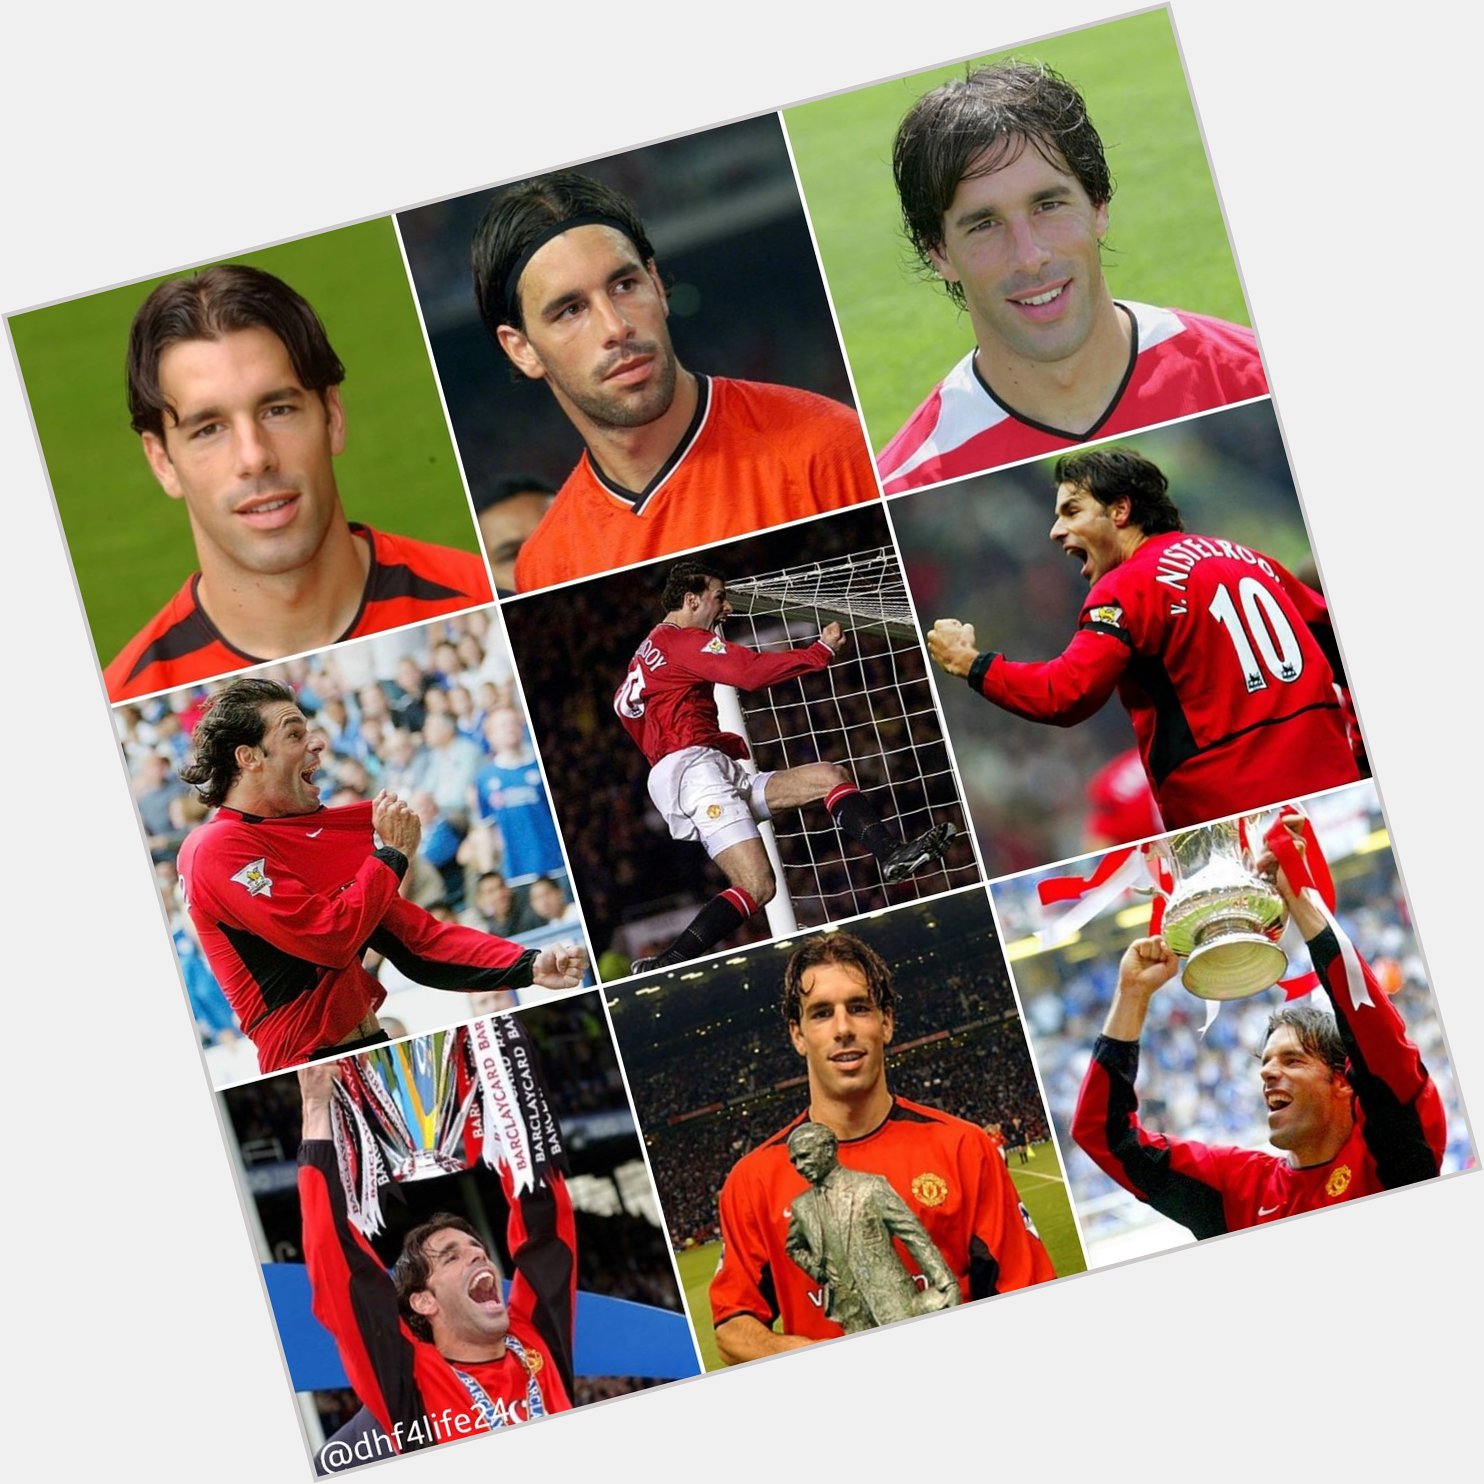 Happy 46th Birthday   on 01st July 2022 to Ruud van Nistelrooy - What a Player and LEGEND... 